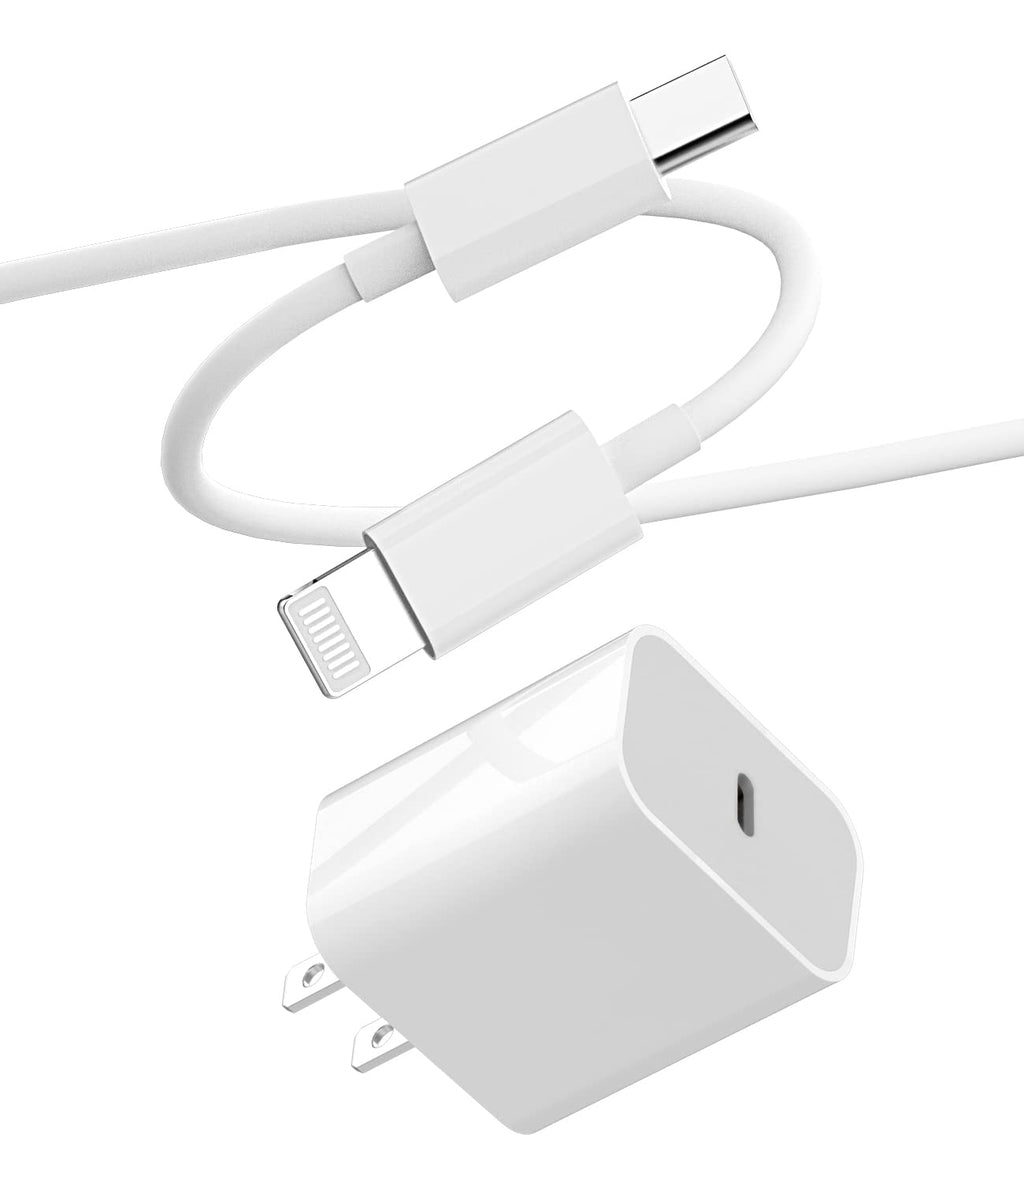  [AUSTRALIA] - USB C Fast PD Wall Charger Block 5ft Cable 18W 20W Watt Power Charging Adapter Quick Box Compatible with Ipad ARI iPhone 11 12 PRO MAX Mini XS XR SE2 8Plus Airpod Cord for Samsung Type C Plug